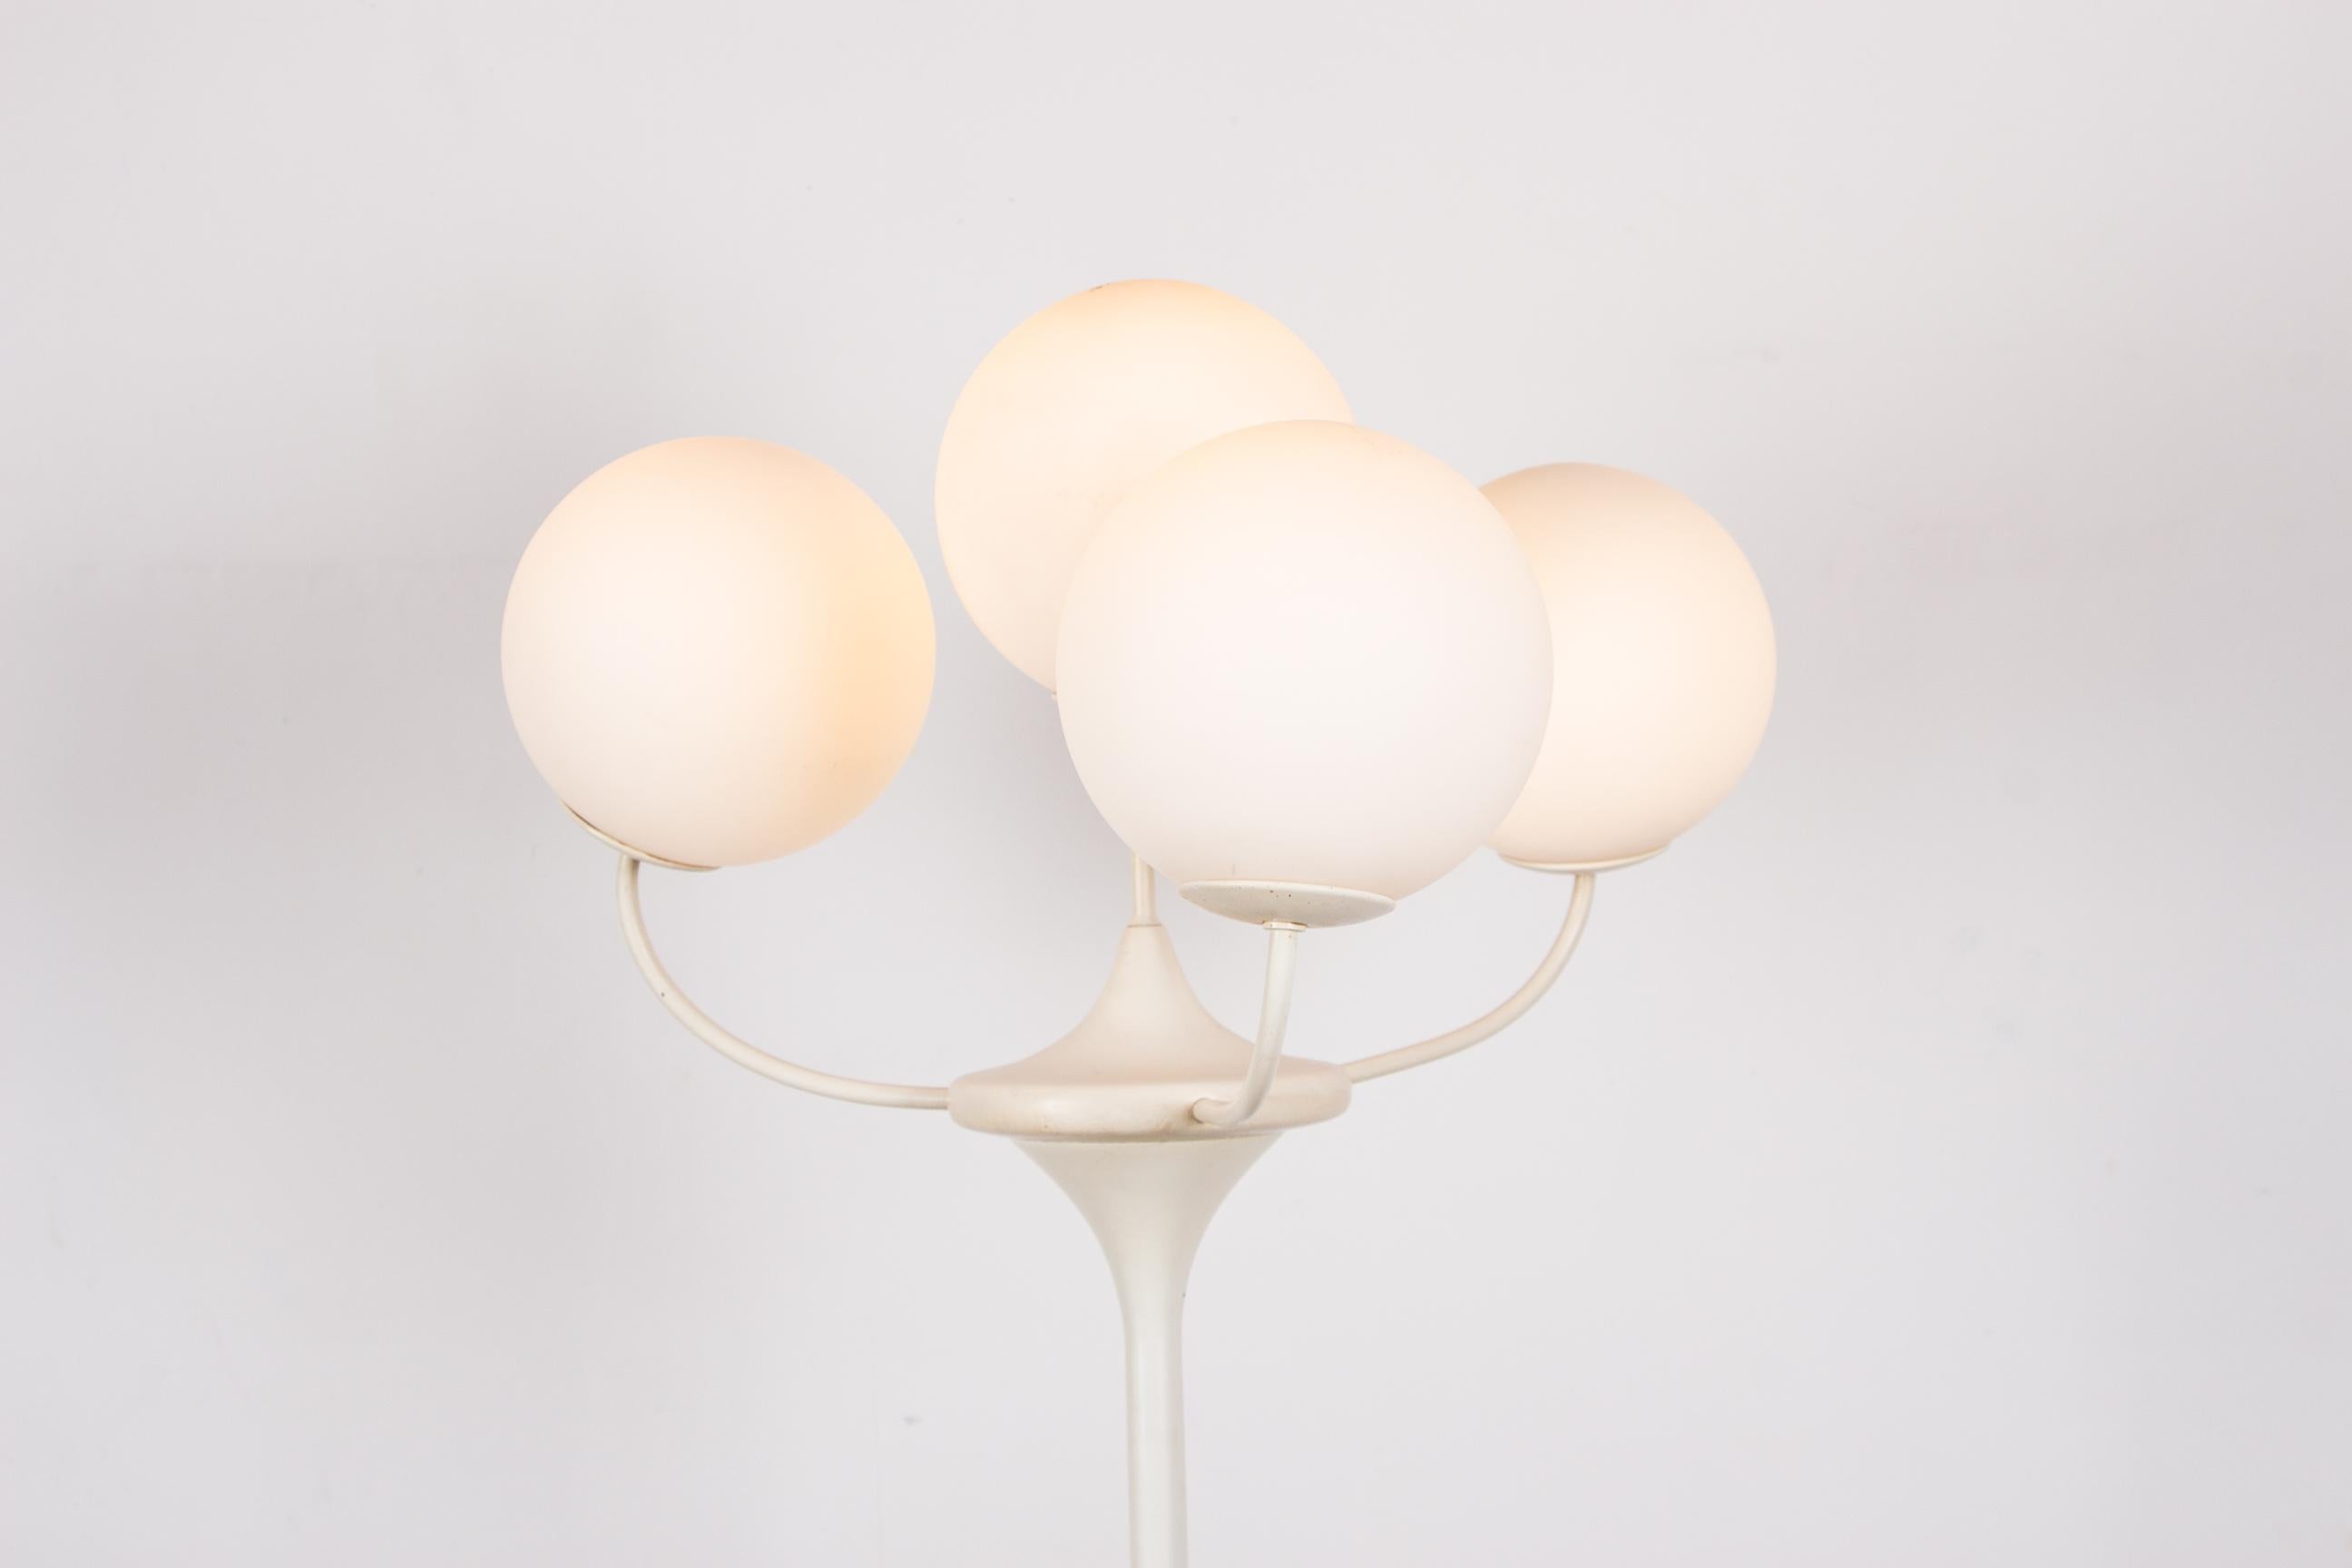 Superb large floor lamp in Space-Age or Scandinavian spirit. 
The 4 white and round globes open in collar and are completed by the tulip base, all offering a refined design very airy. 
Manufacture of very beautiful workmanship, discreet and sensual